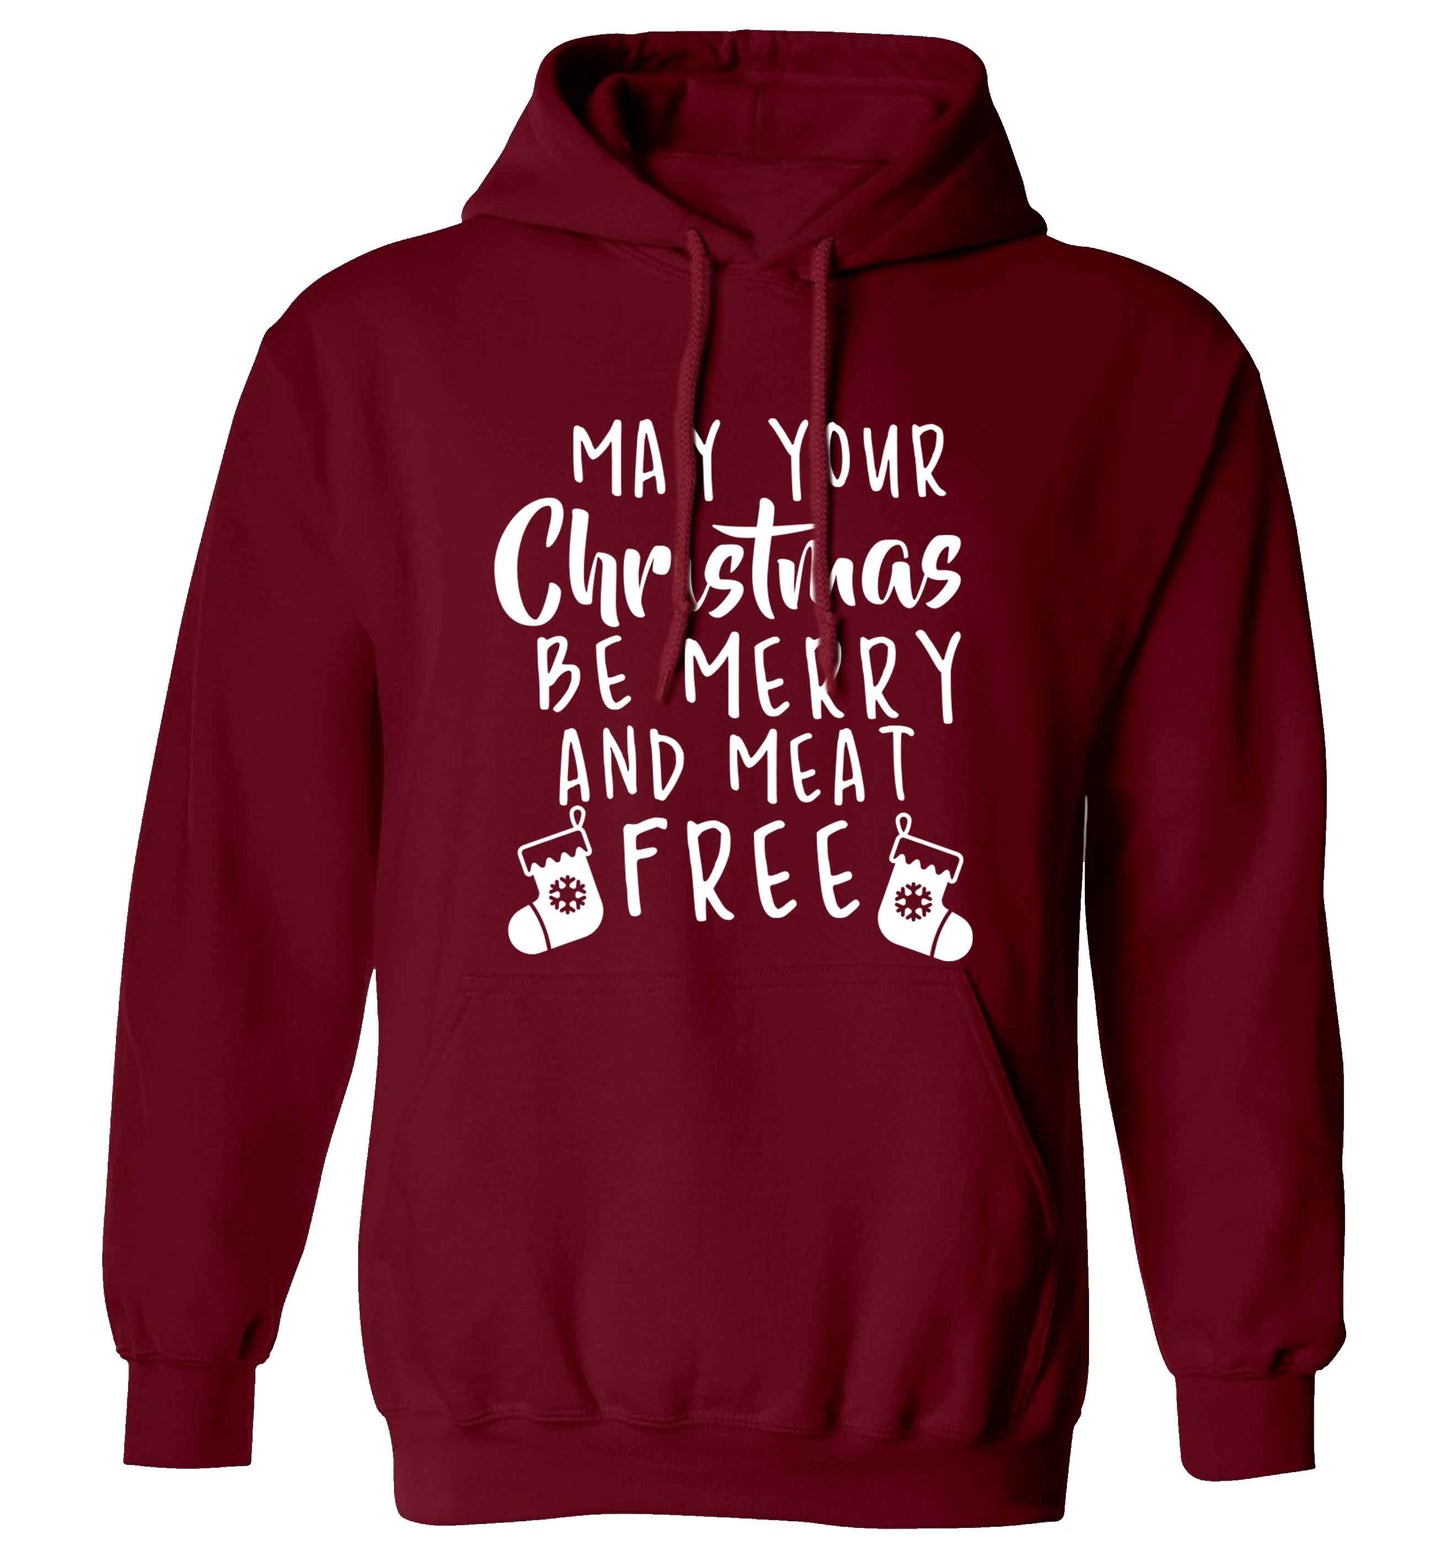 May your Christmas be merry and meat free adults unisex maroon hoodie 2XL